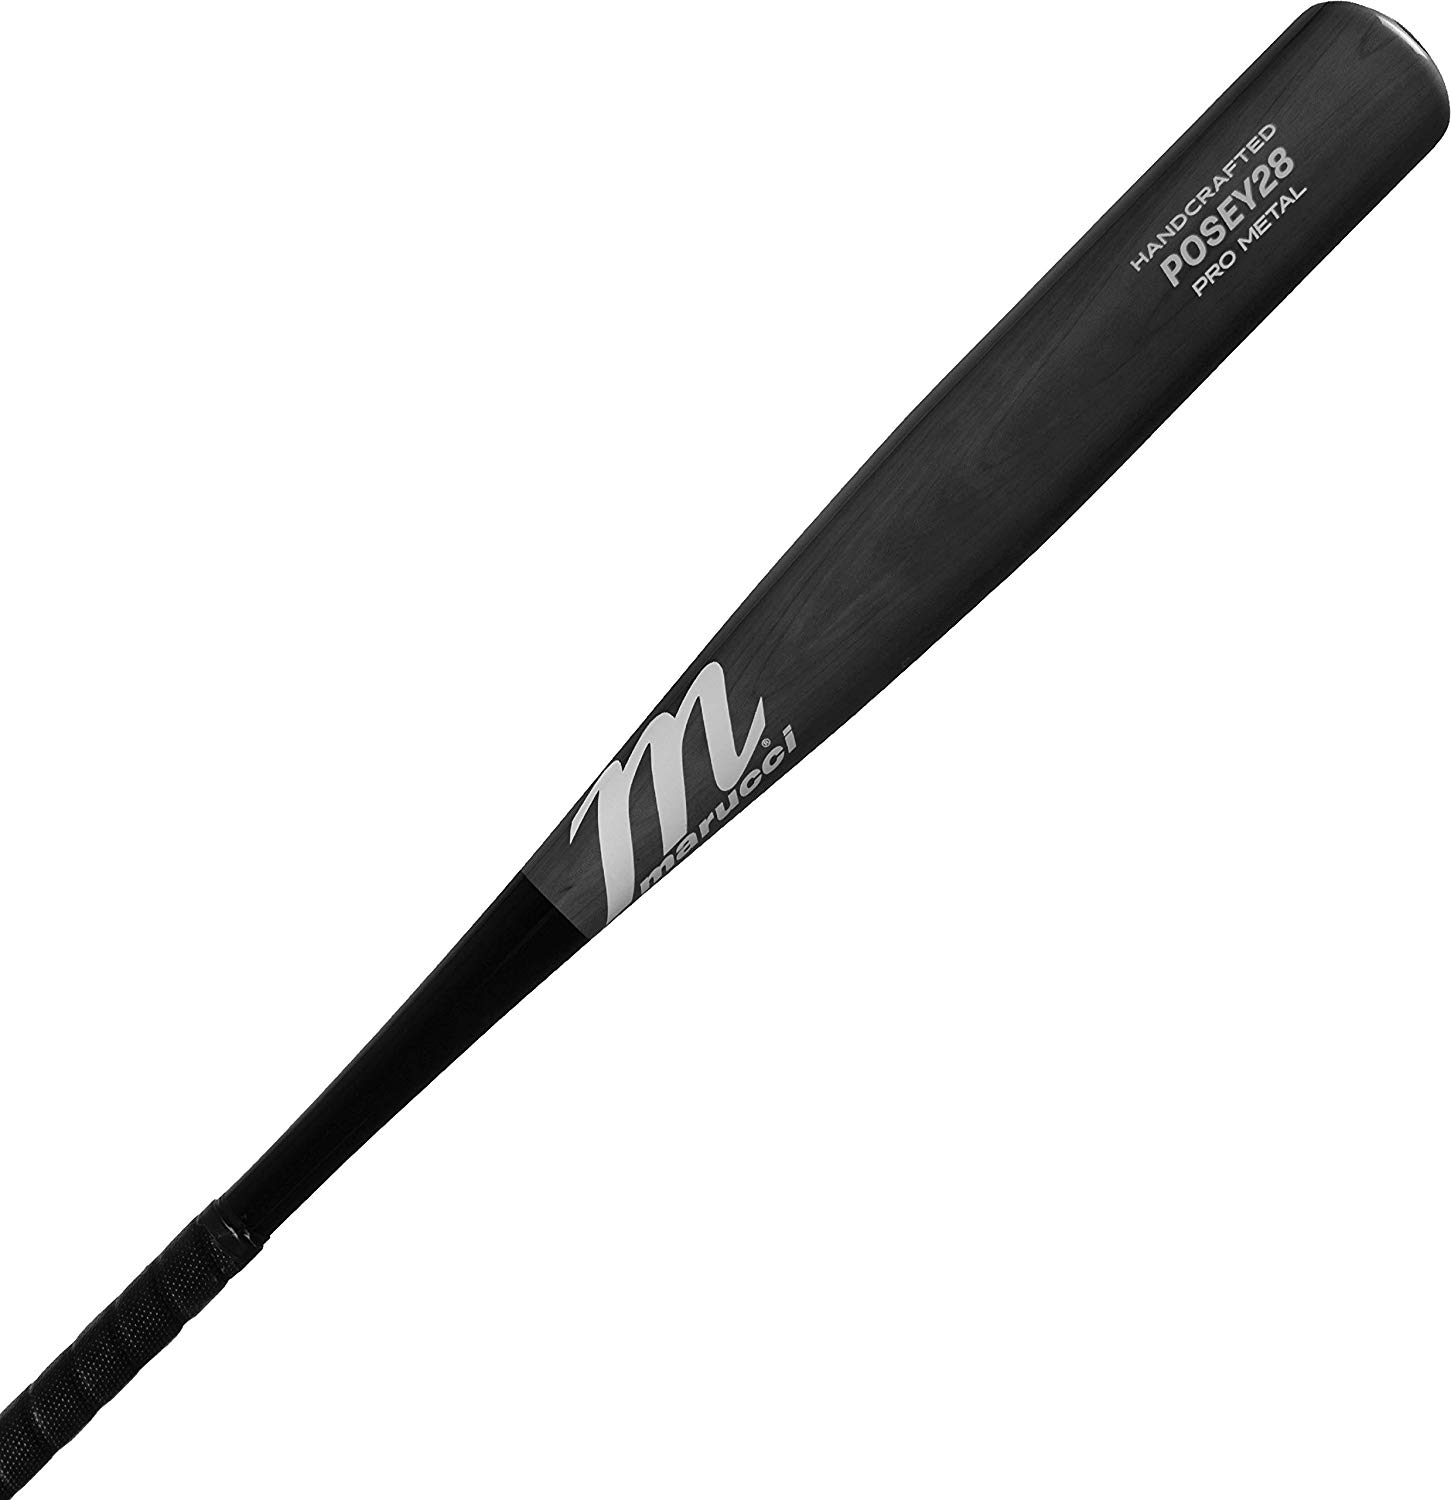 AZ105 alloy, the strongest aluminum on the Marucci bat line, allows for thinner barrel walls, a higher response rate and better durability Multi-variable wall design creates an expanded sweet spot and thinner barrel walls that are more forgiving after off-centered contact 6th Generation AV2 Anti-Vibration knob features an upgraded, finely tuned harmonic dampening system for better feel and less negative vibrational feedback Ring-free barrel construction allows for more barrel flex and increases performance with no dead spots Precision-balanced barrel results in a lower M. O. I. and balanced feel for precision and control.